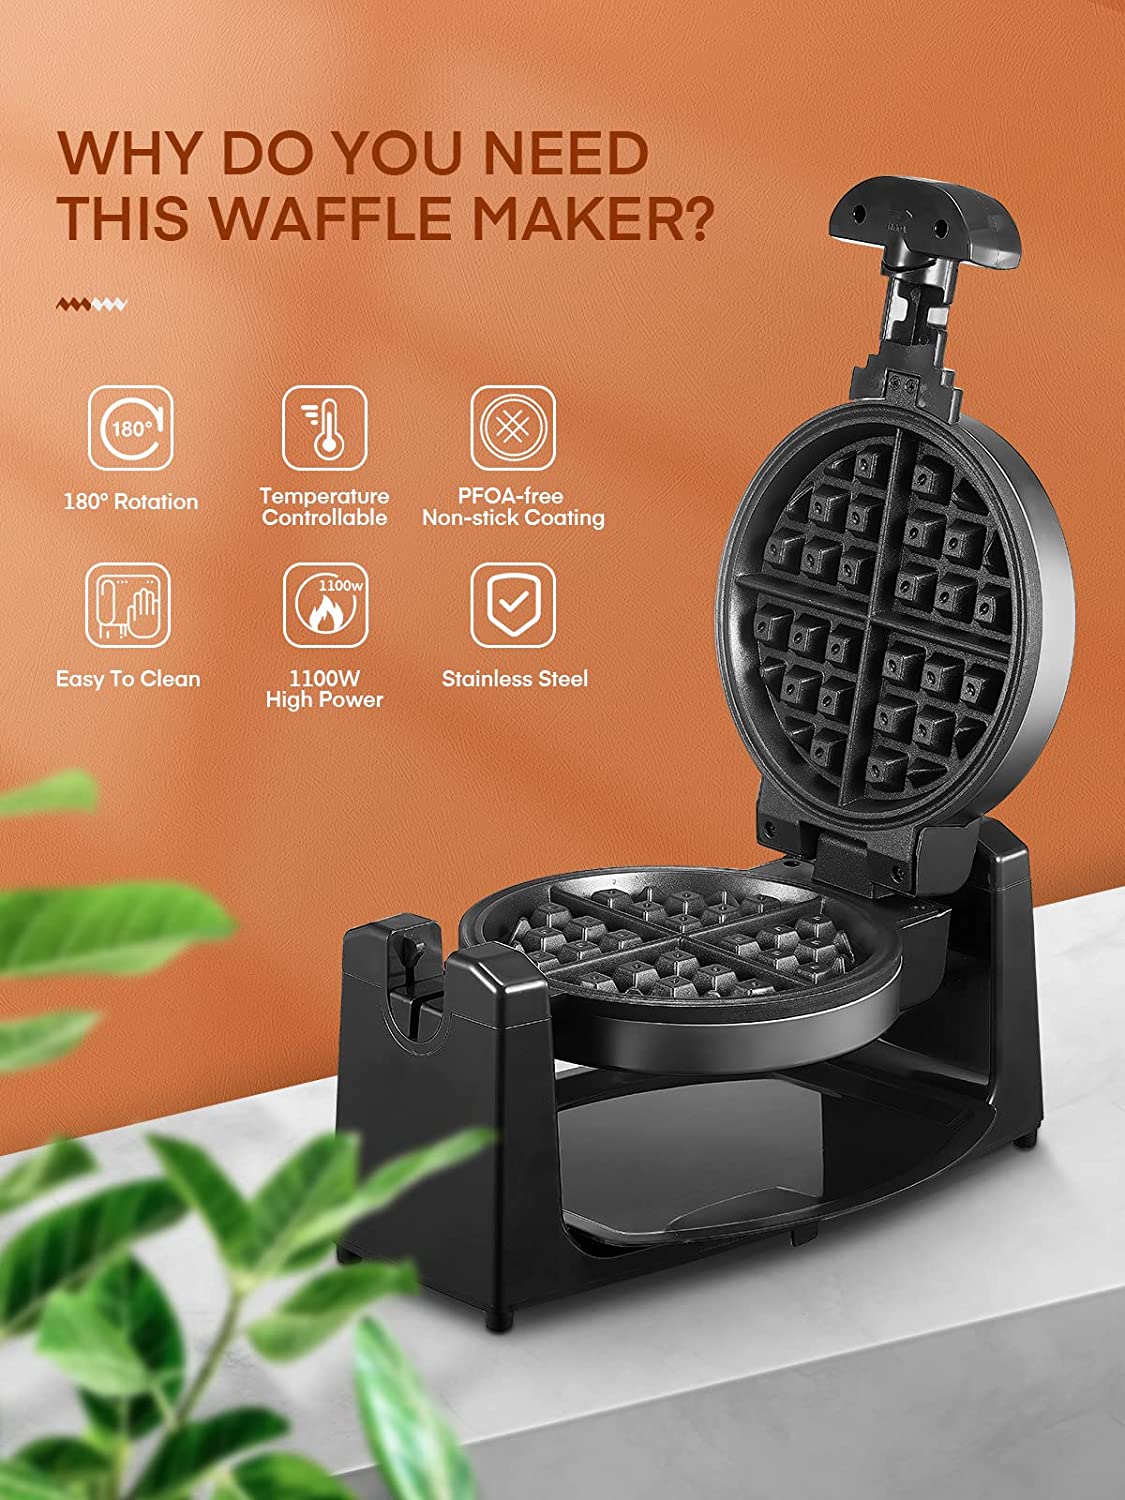 why do you need this waffle maker, Flip Belgian Waffle Maker, 180° Rotating Waffle Iron with Easy to Clean Non-Stick Surfaces, Classic 1" Thick Waffles, Included Recipe, Removable Drip Tray, Browning Control, 1100W, Stainless Steel